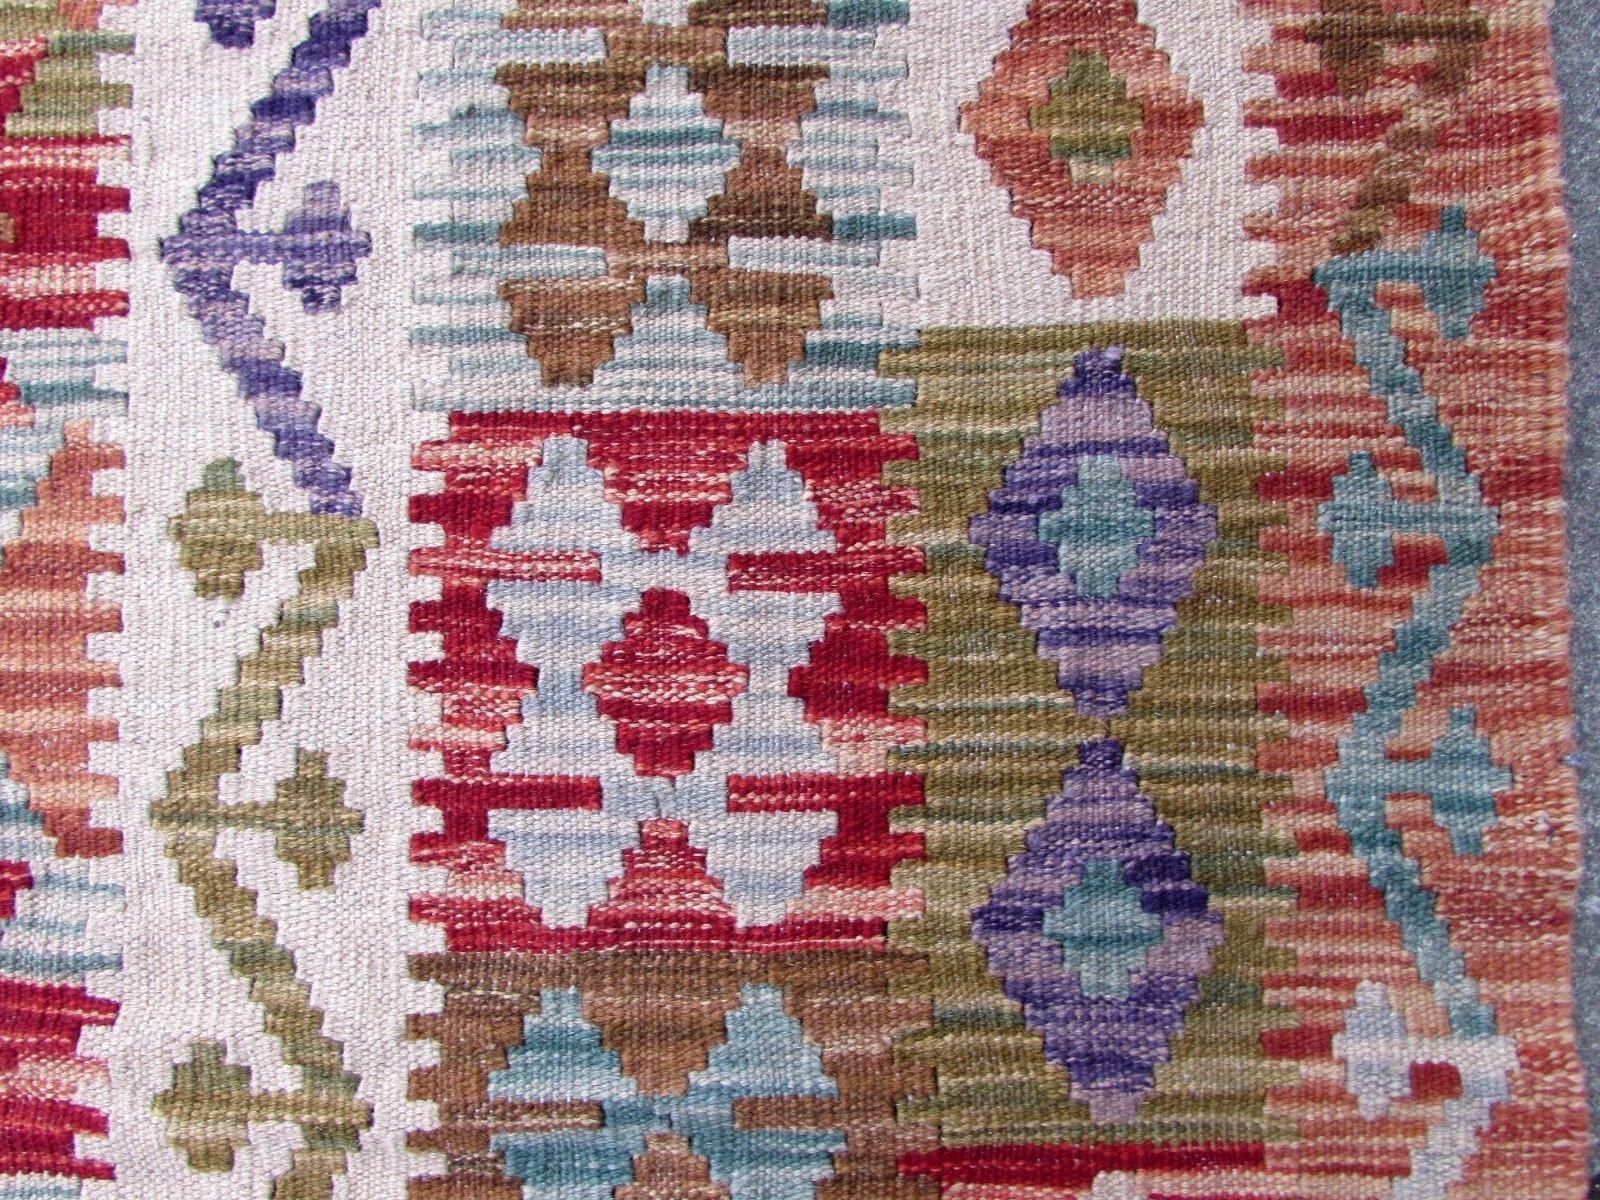 Handmade vintage Afghan flat-weave in geometric design. The rug is from the end of the 20th century in original good condition.

- Condition: original good,

- circa: 1970s,

- Size: 5.9' x 8.1' (181cm x 247cm),

- Material: wool,

-